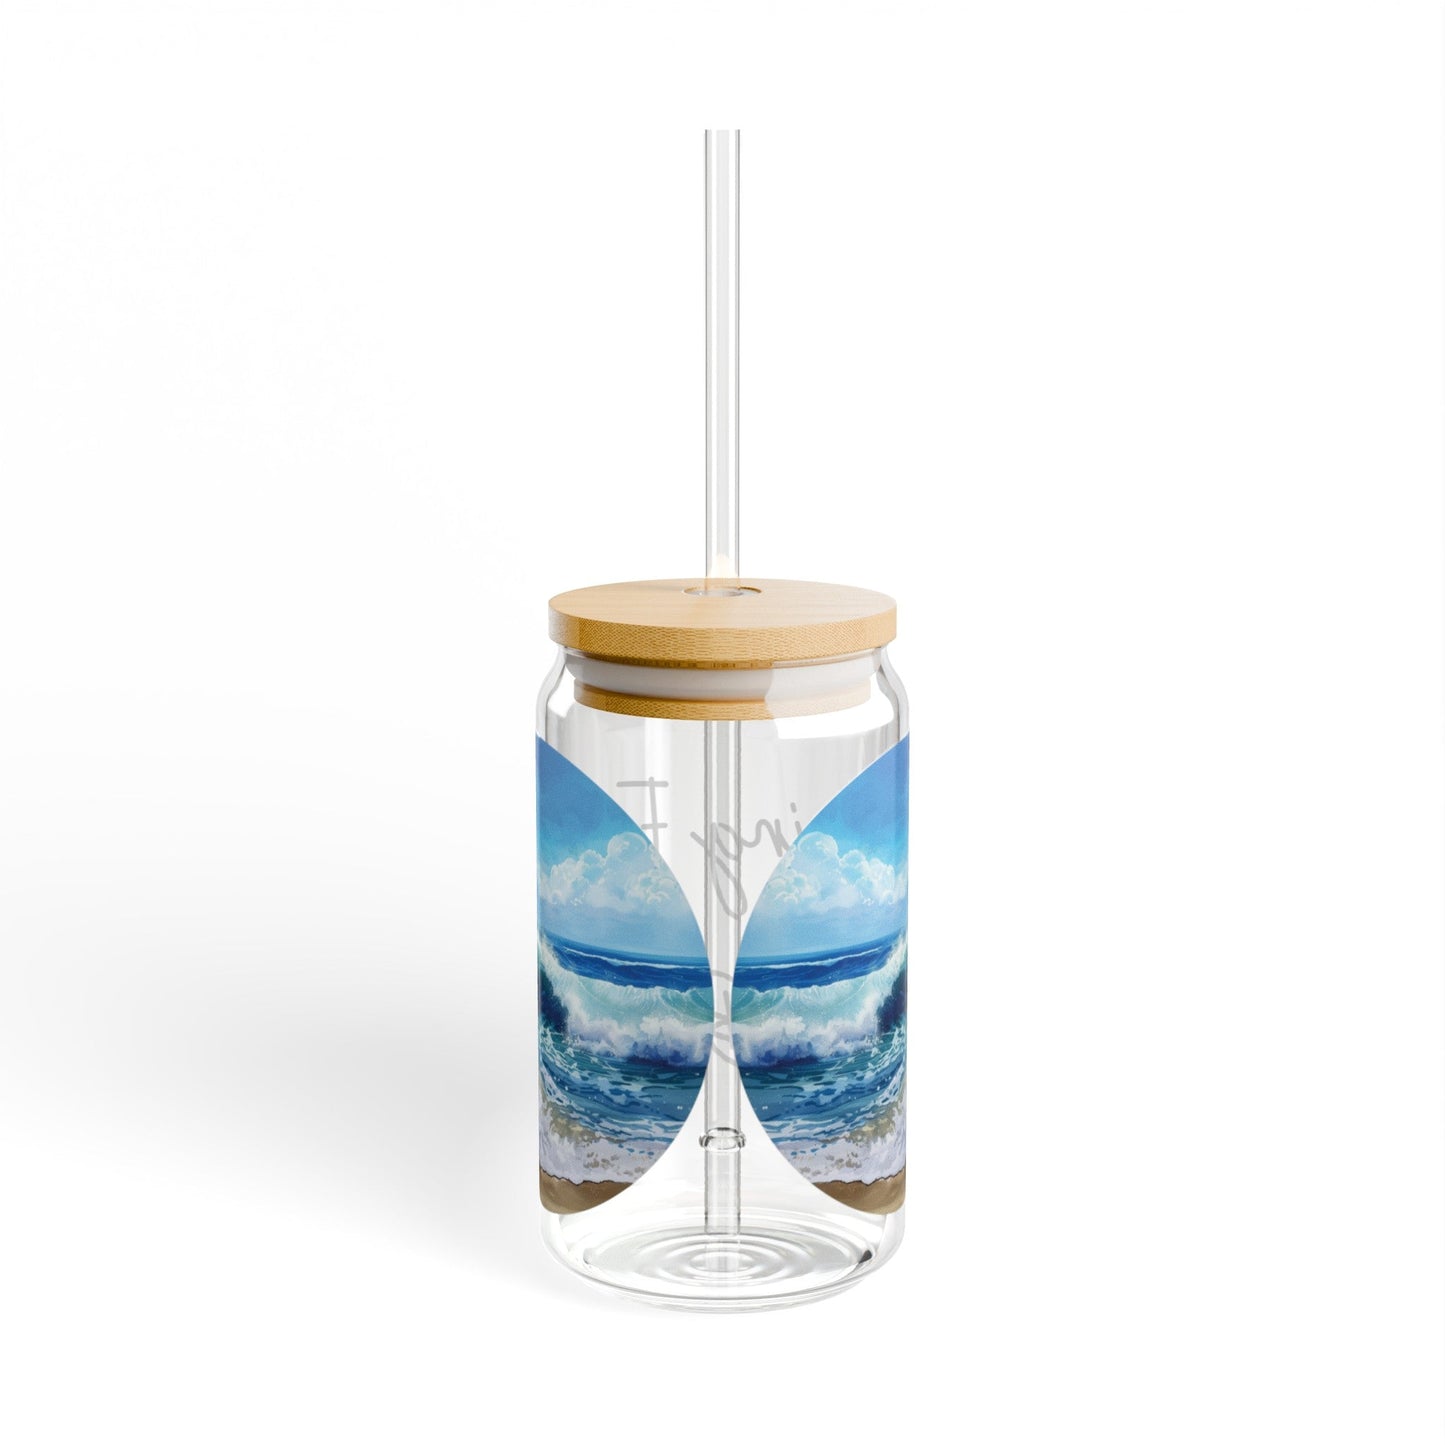 Waving From The Beach | Glass Sipper (16oz) - Moikas